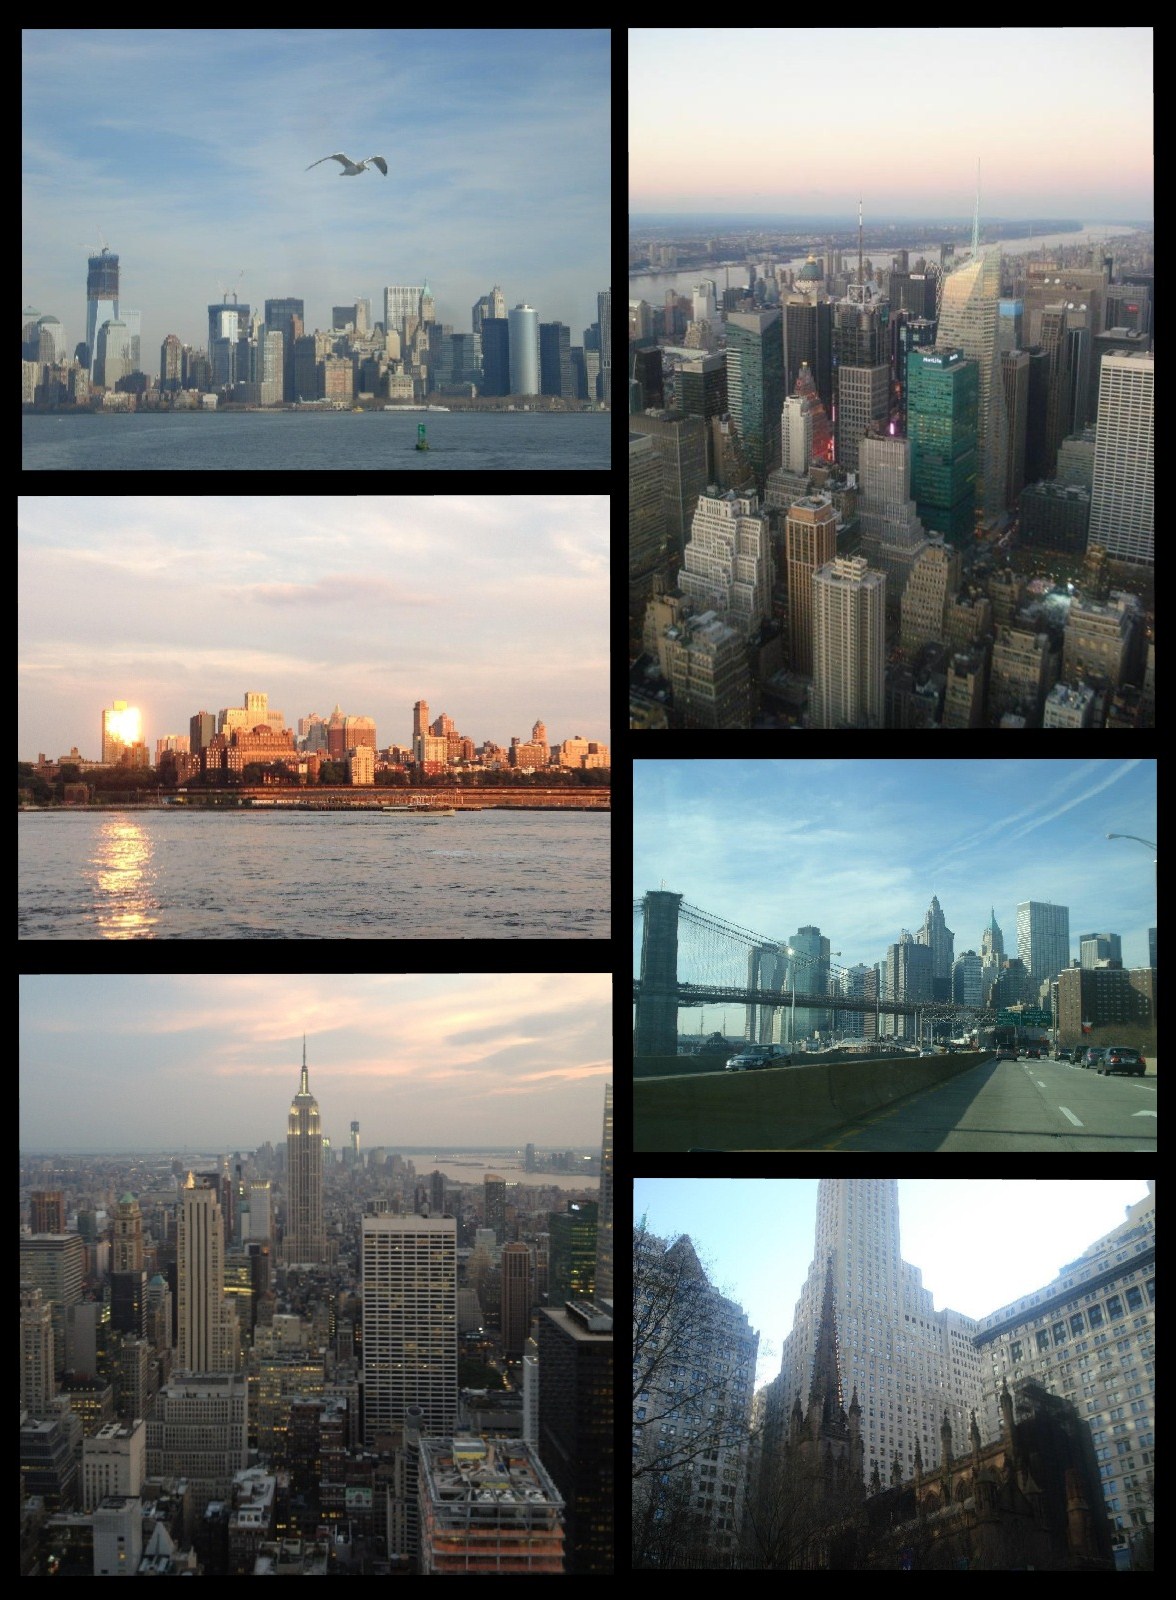 My first days in New York City